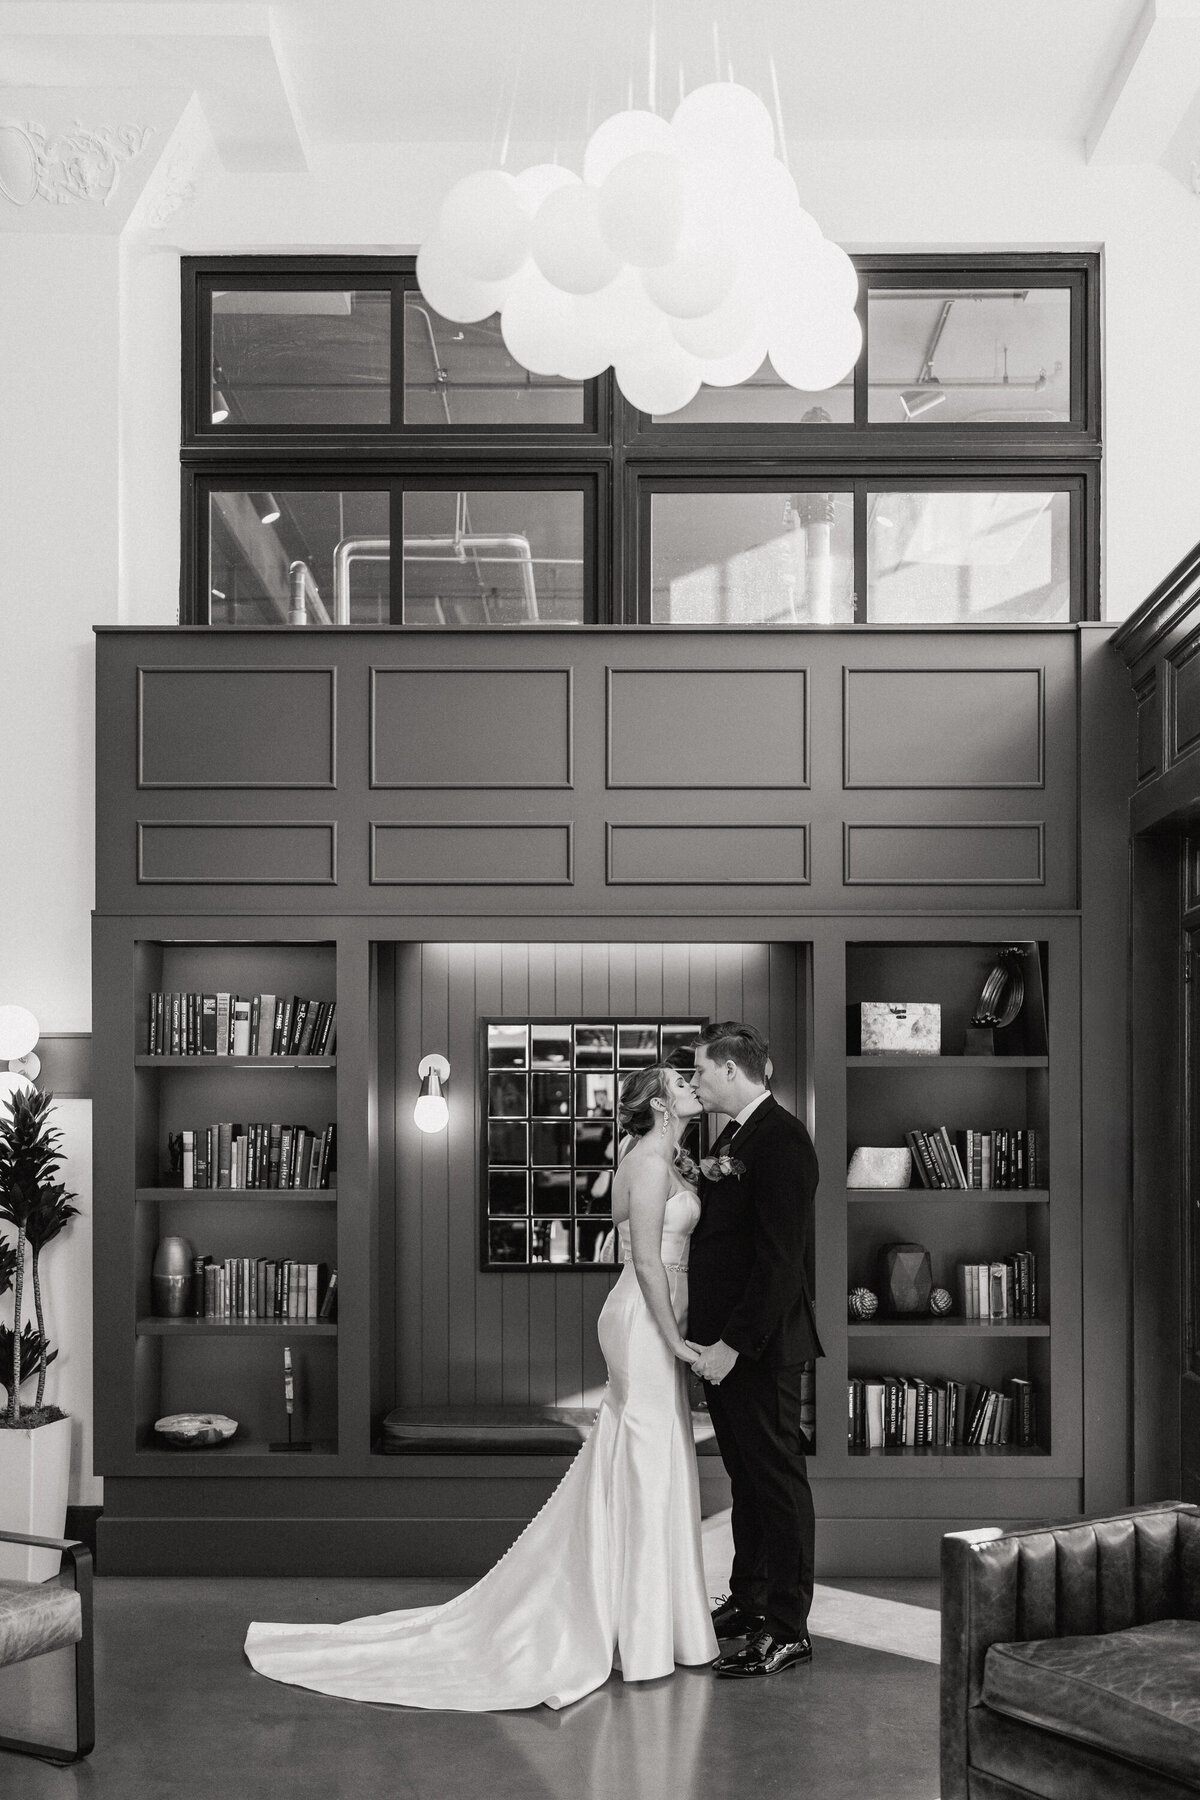 A black and white photograph of Cheyenne and Adam on their wedding day on New Year’s Eve in San Antonio, Texas. The bride and groom have just seen each other for the first time on their wedding day and they are facing each other, holding each other's hands at their sides and kissing. They are inside a building with a dark bookcase behind them and a chandelier of softly lit bulbs overhead. Wedding photography by Stacie McChesney/Vitae Weddings.